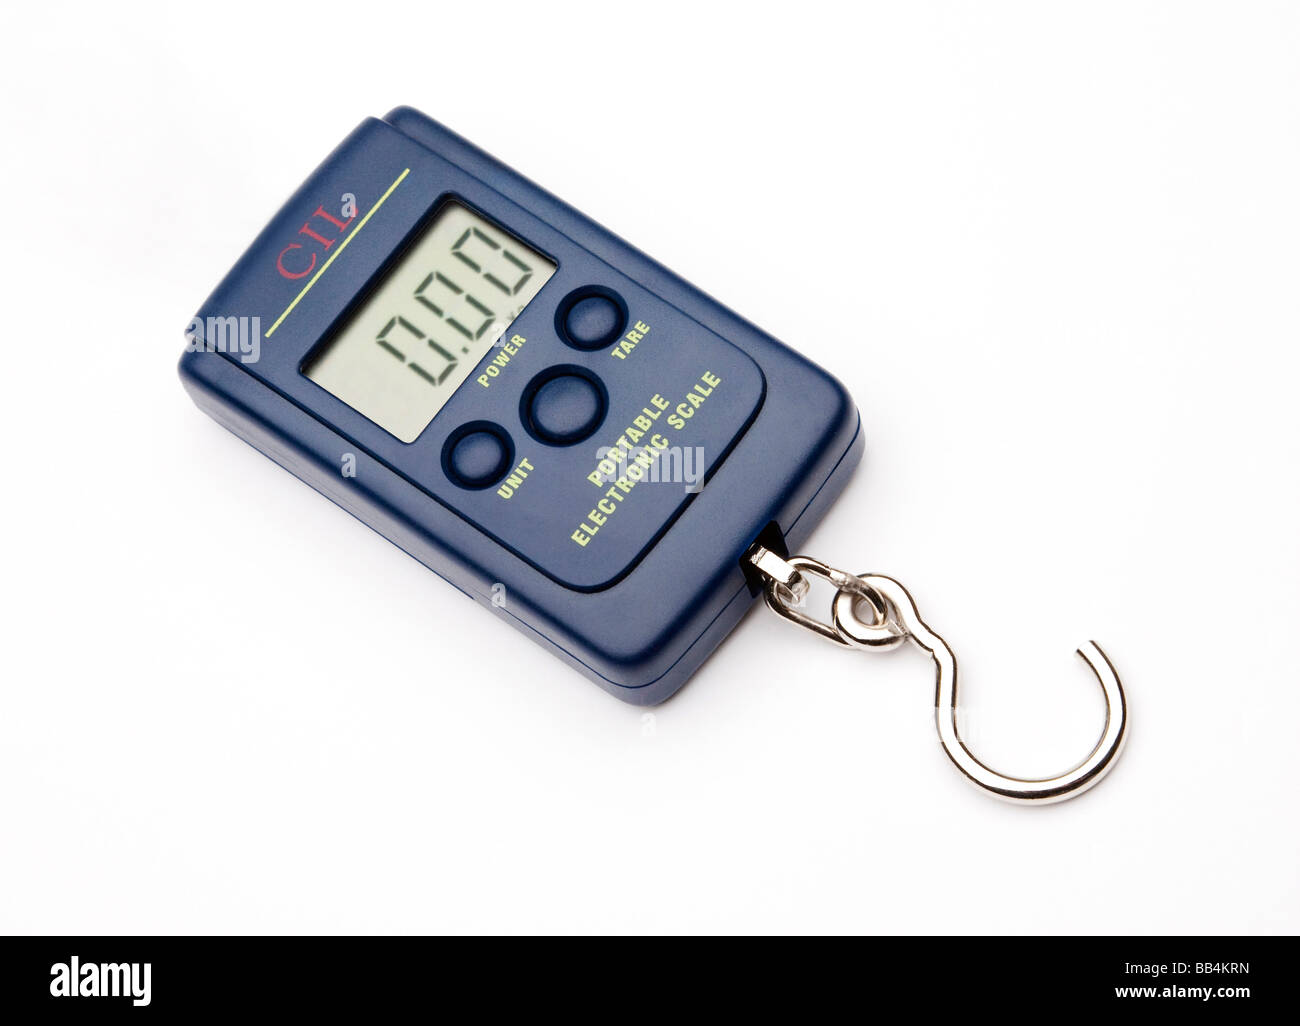 digital weighing hanging scales / balance that can weight up to 40Kg in 20g units Stock Photo